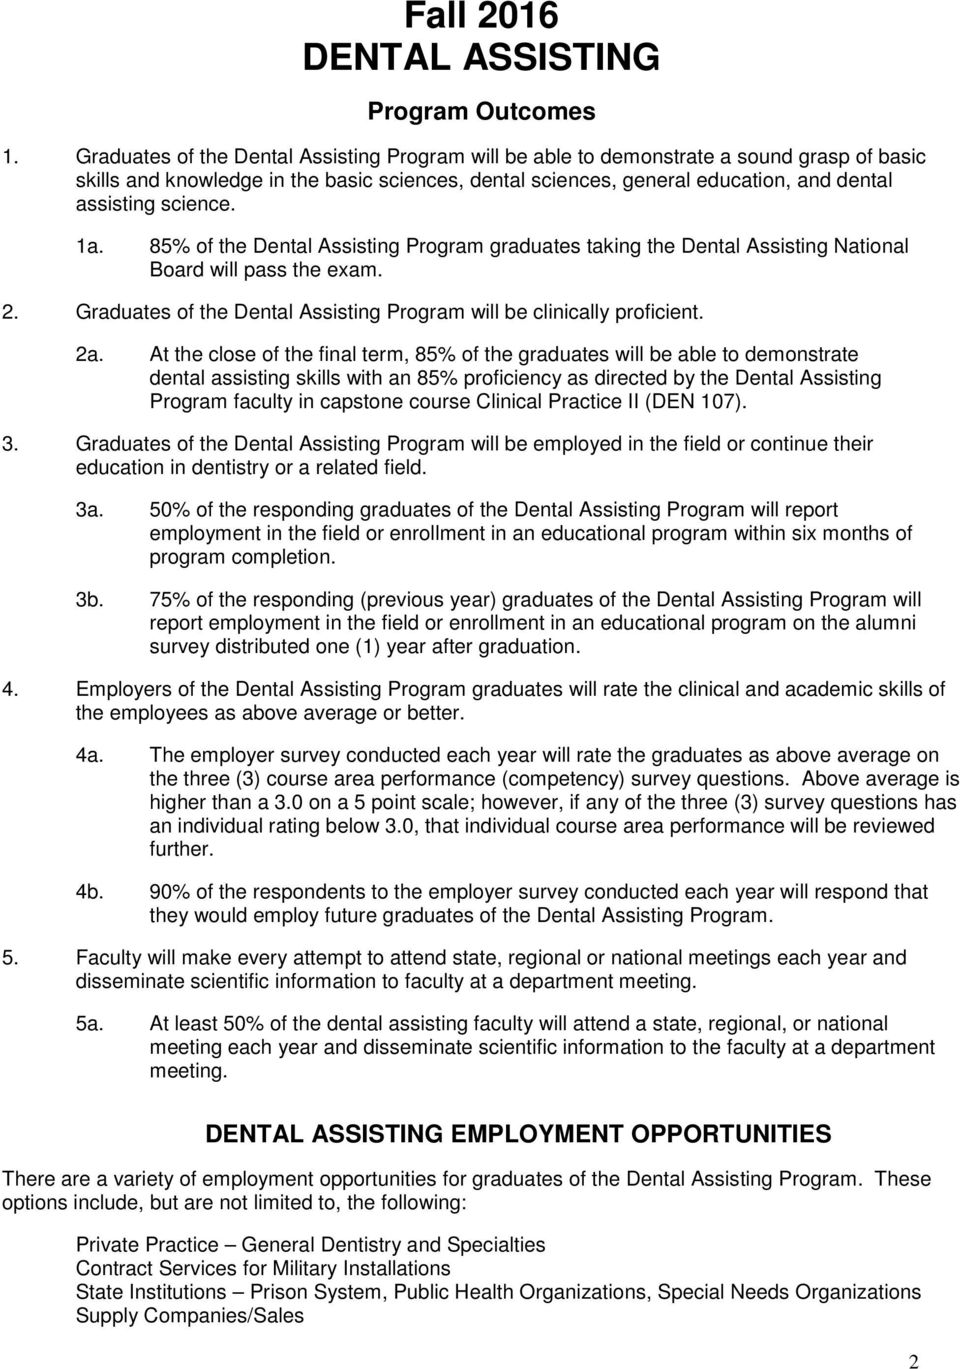 science. 1a. 85% of the Dental Assisting Program graduates taking the Dental Assisting National Board will pass the exam. 2. Graduates of the Dental Assisting Program will be clinically proficient.